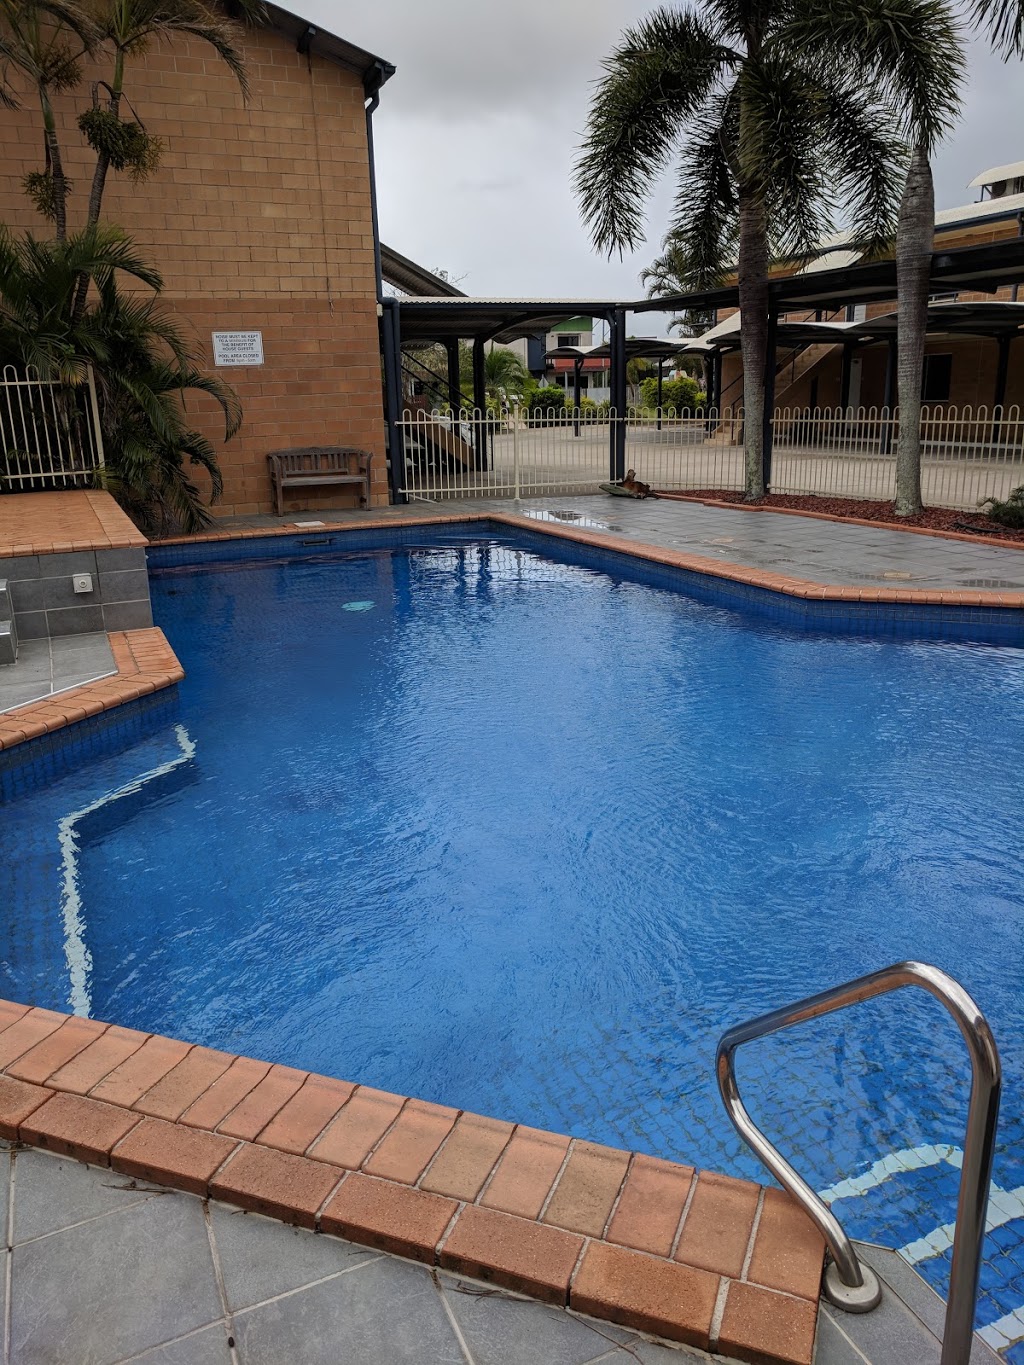 Windmill Motel and Reception Centre | lodging | 5 Highway Plaza, Mackay QLD 4740, Australia | 0749443344 OR +61 7 4944 3344